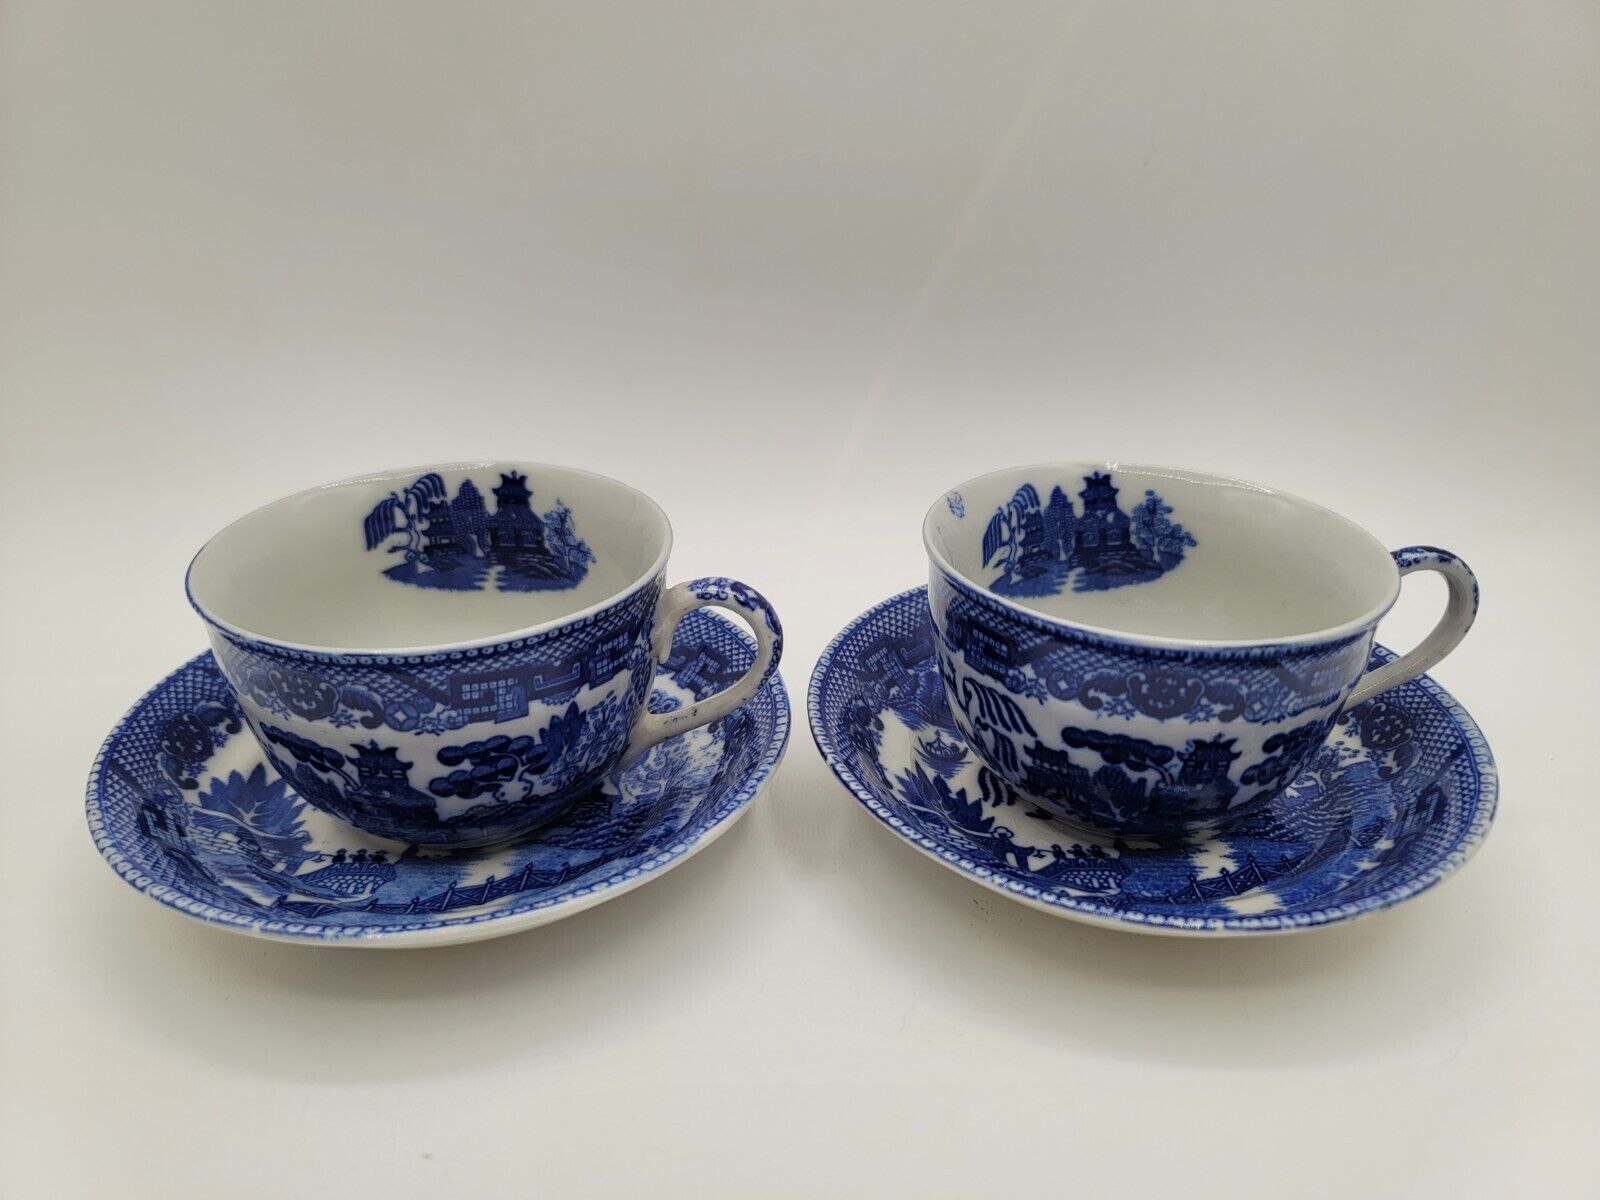 Occupied Japan Blue Willow Teacups And Saucers Set of 2 (4) Beautiful Pieces